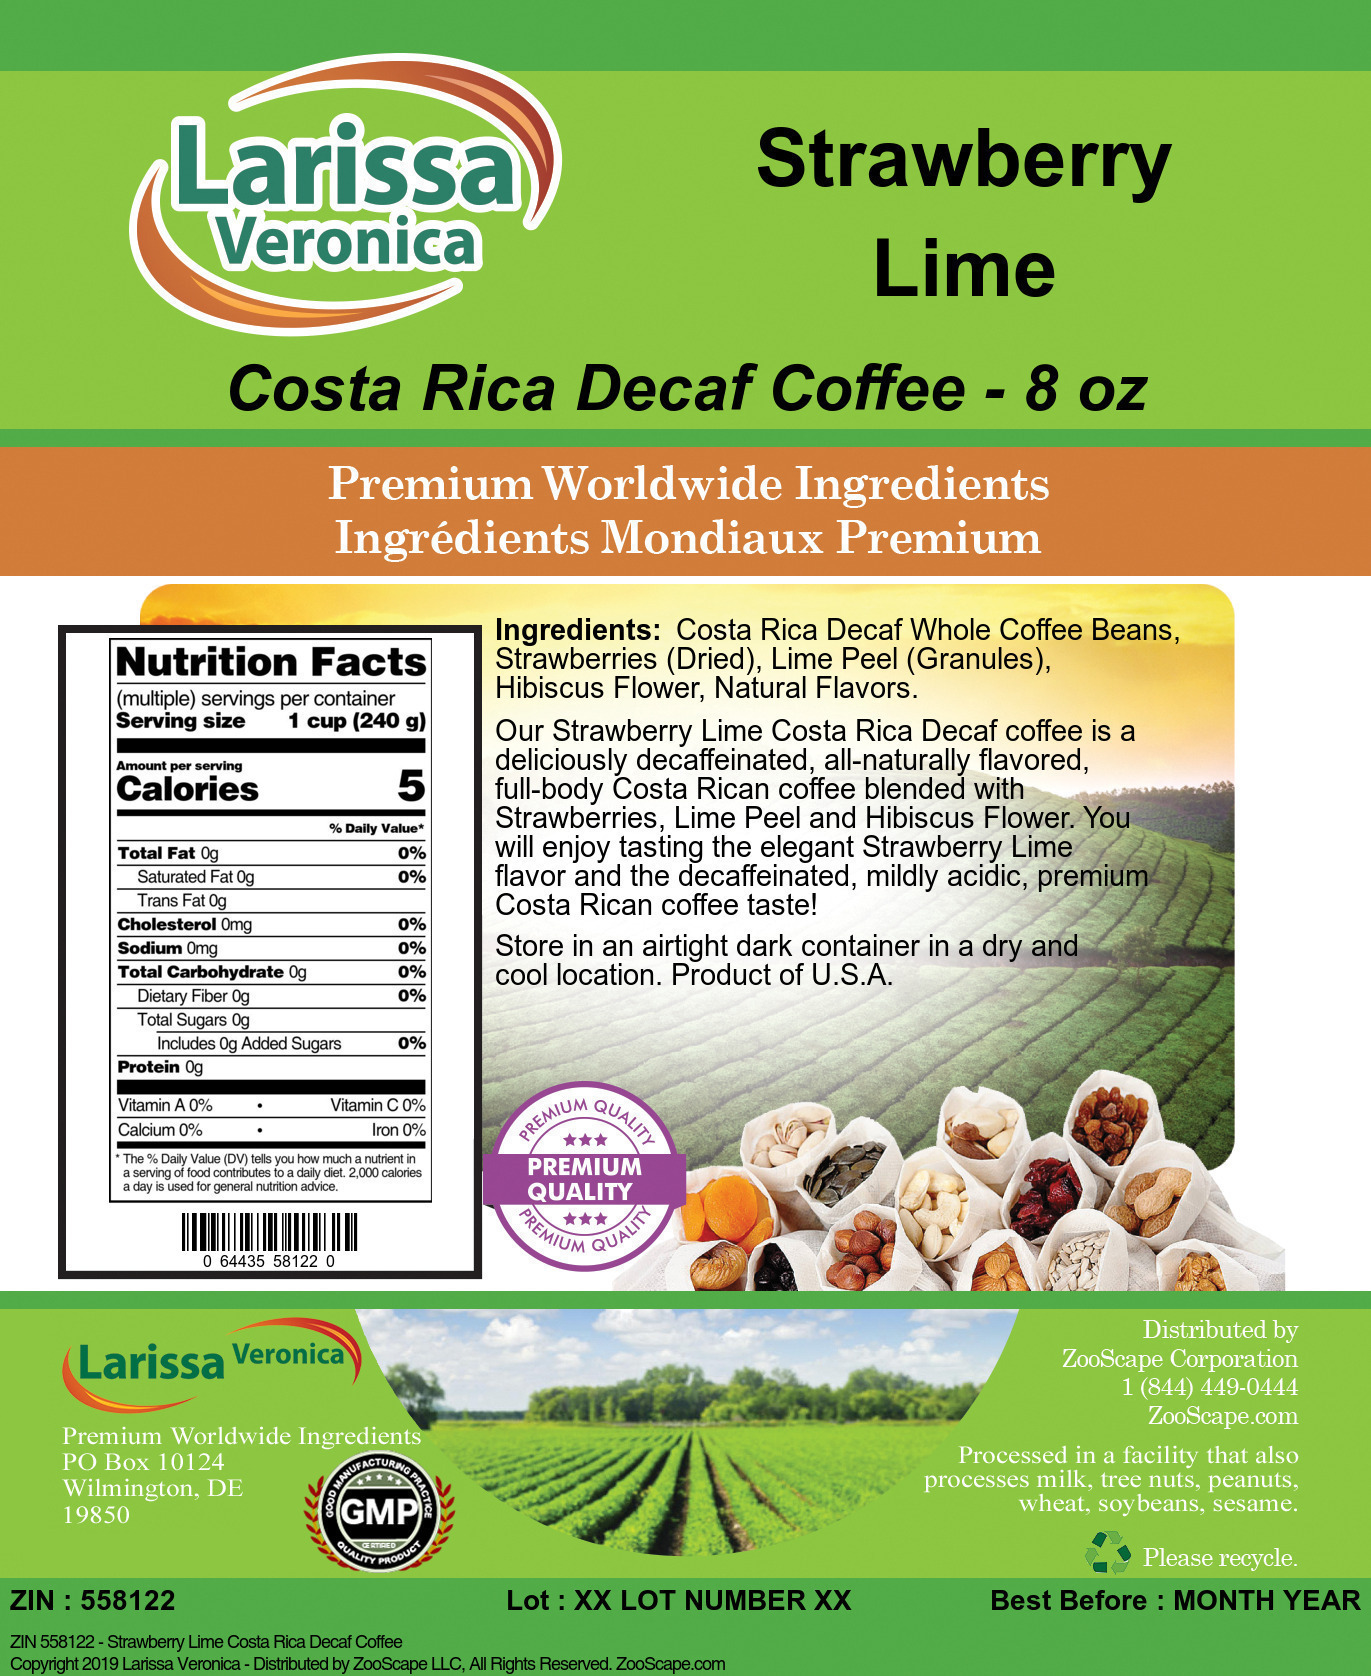 Strawberry Lime Costa Rica Decaf Coffee - Label